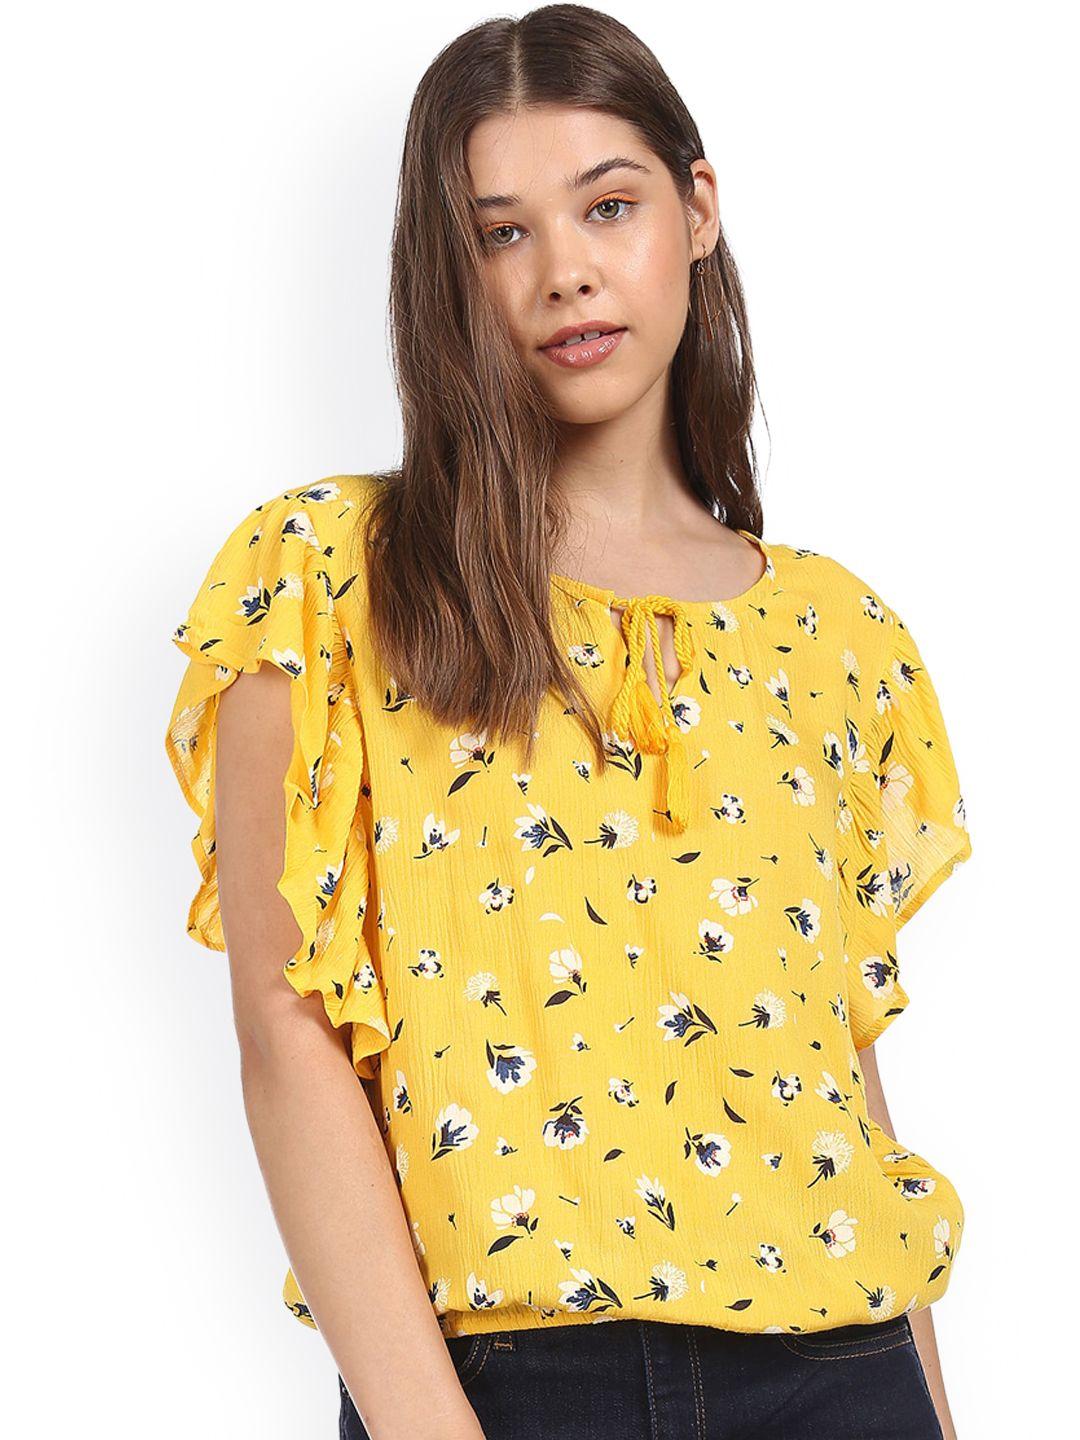 Sugr Yellow Flutter Sleeves Printed Top